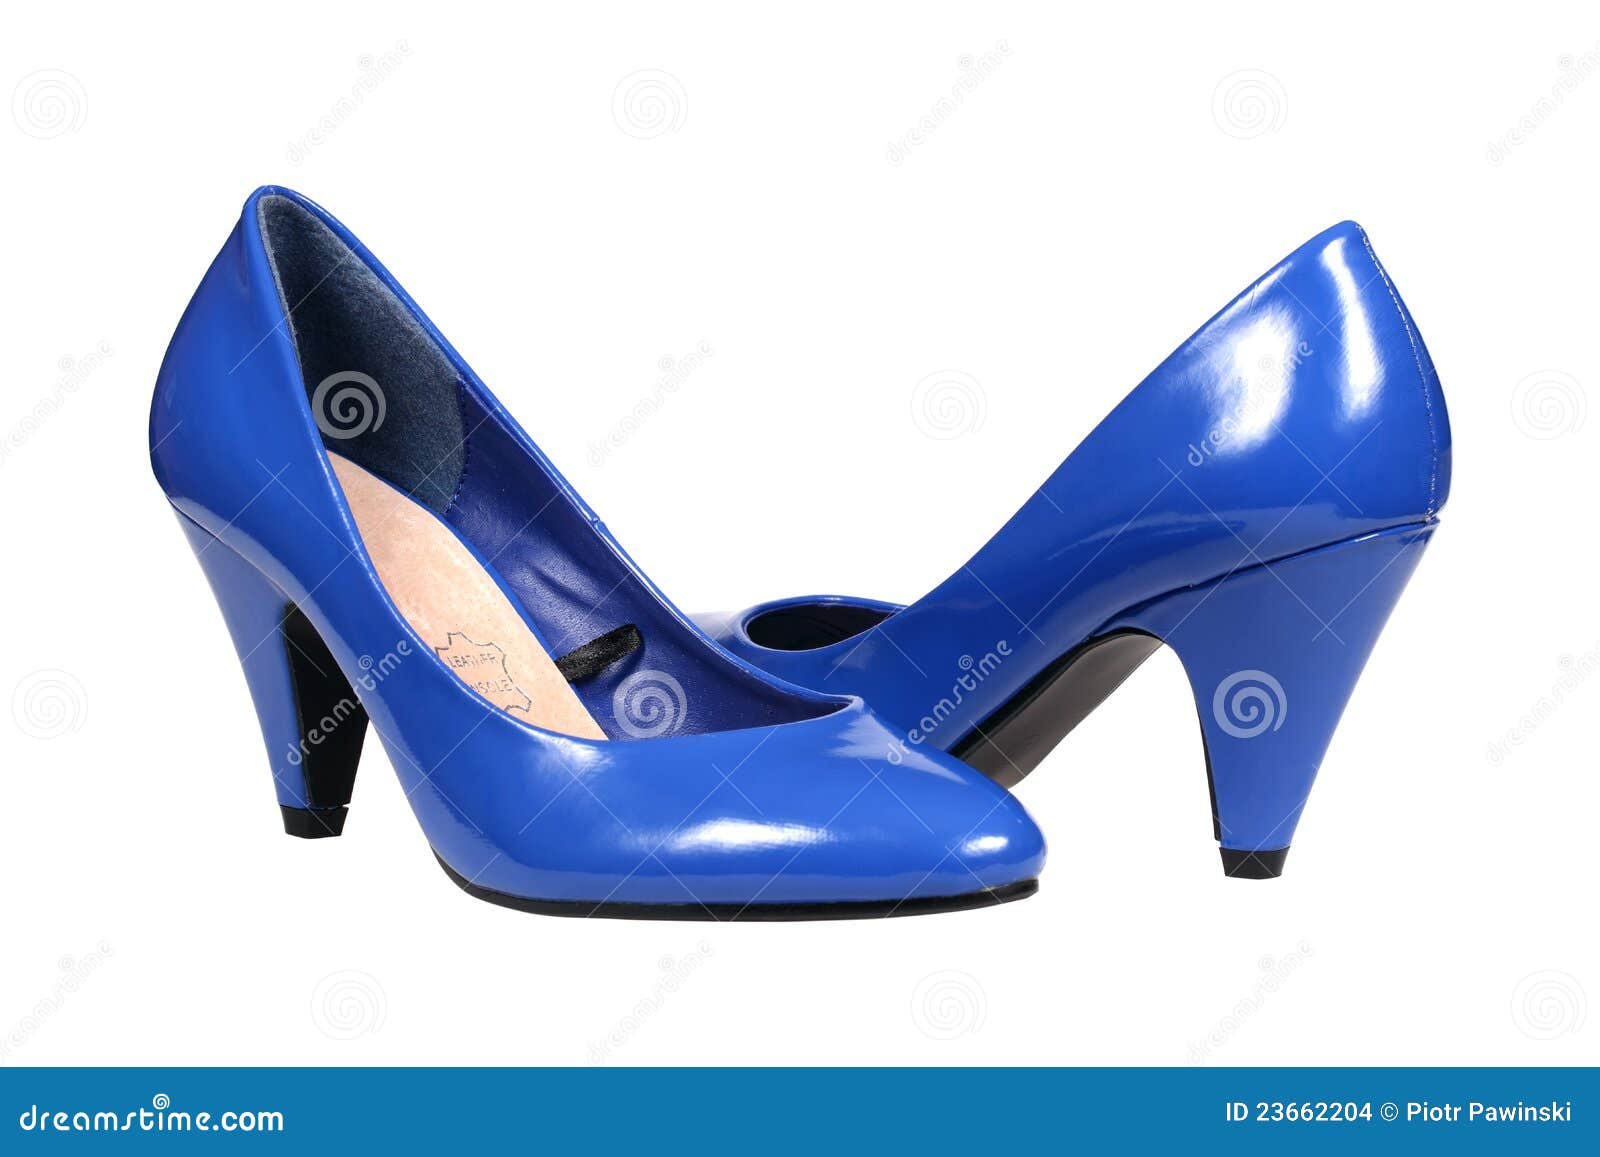 pair of blue women's heel shoes isolated over white with clipping ...